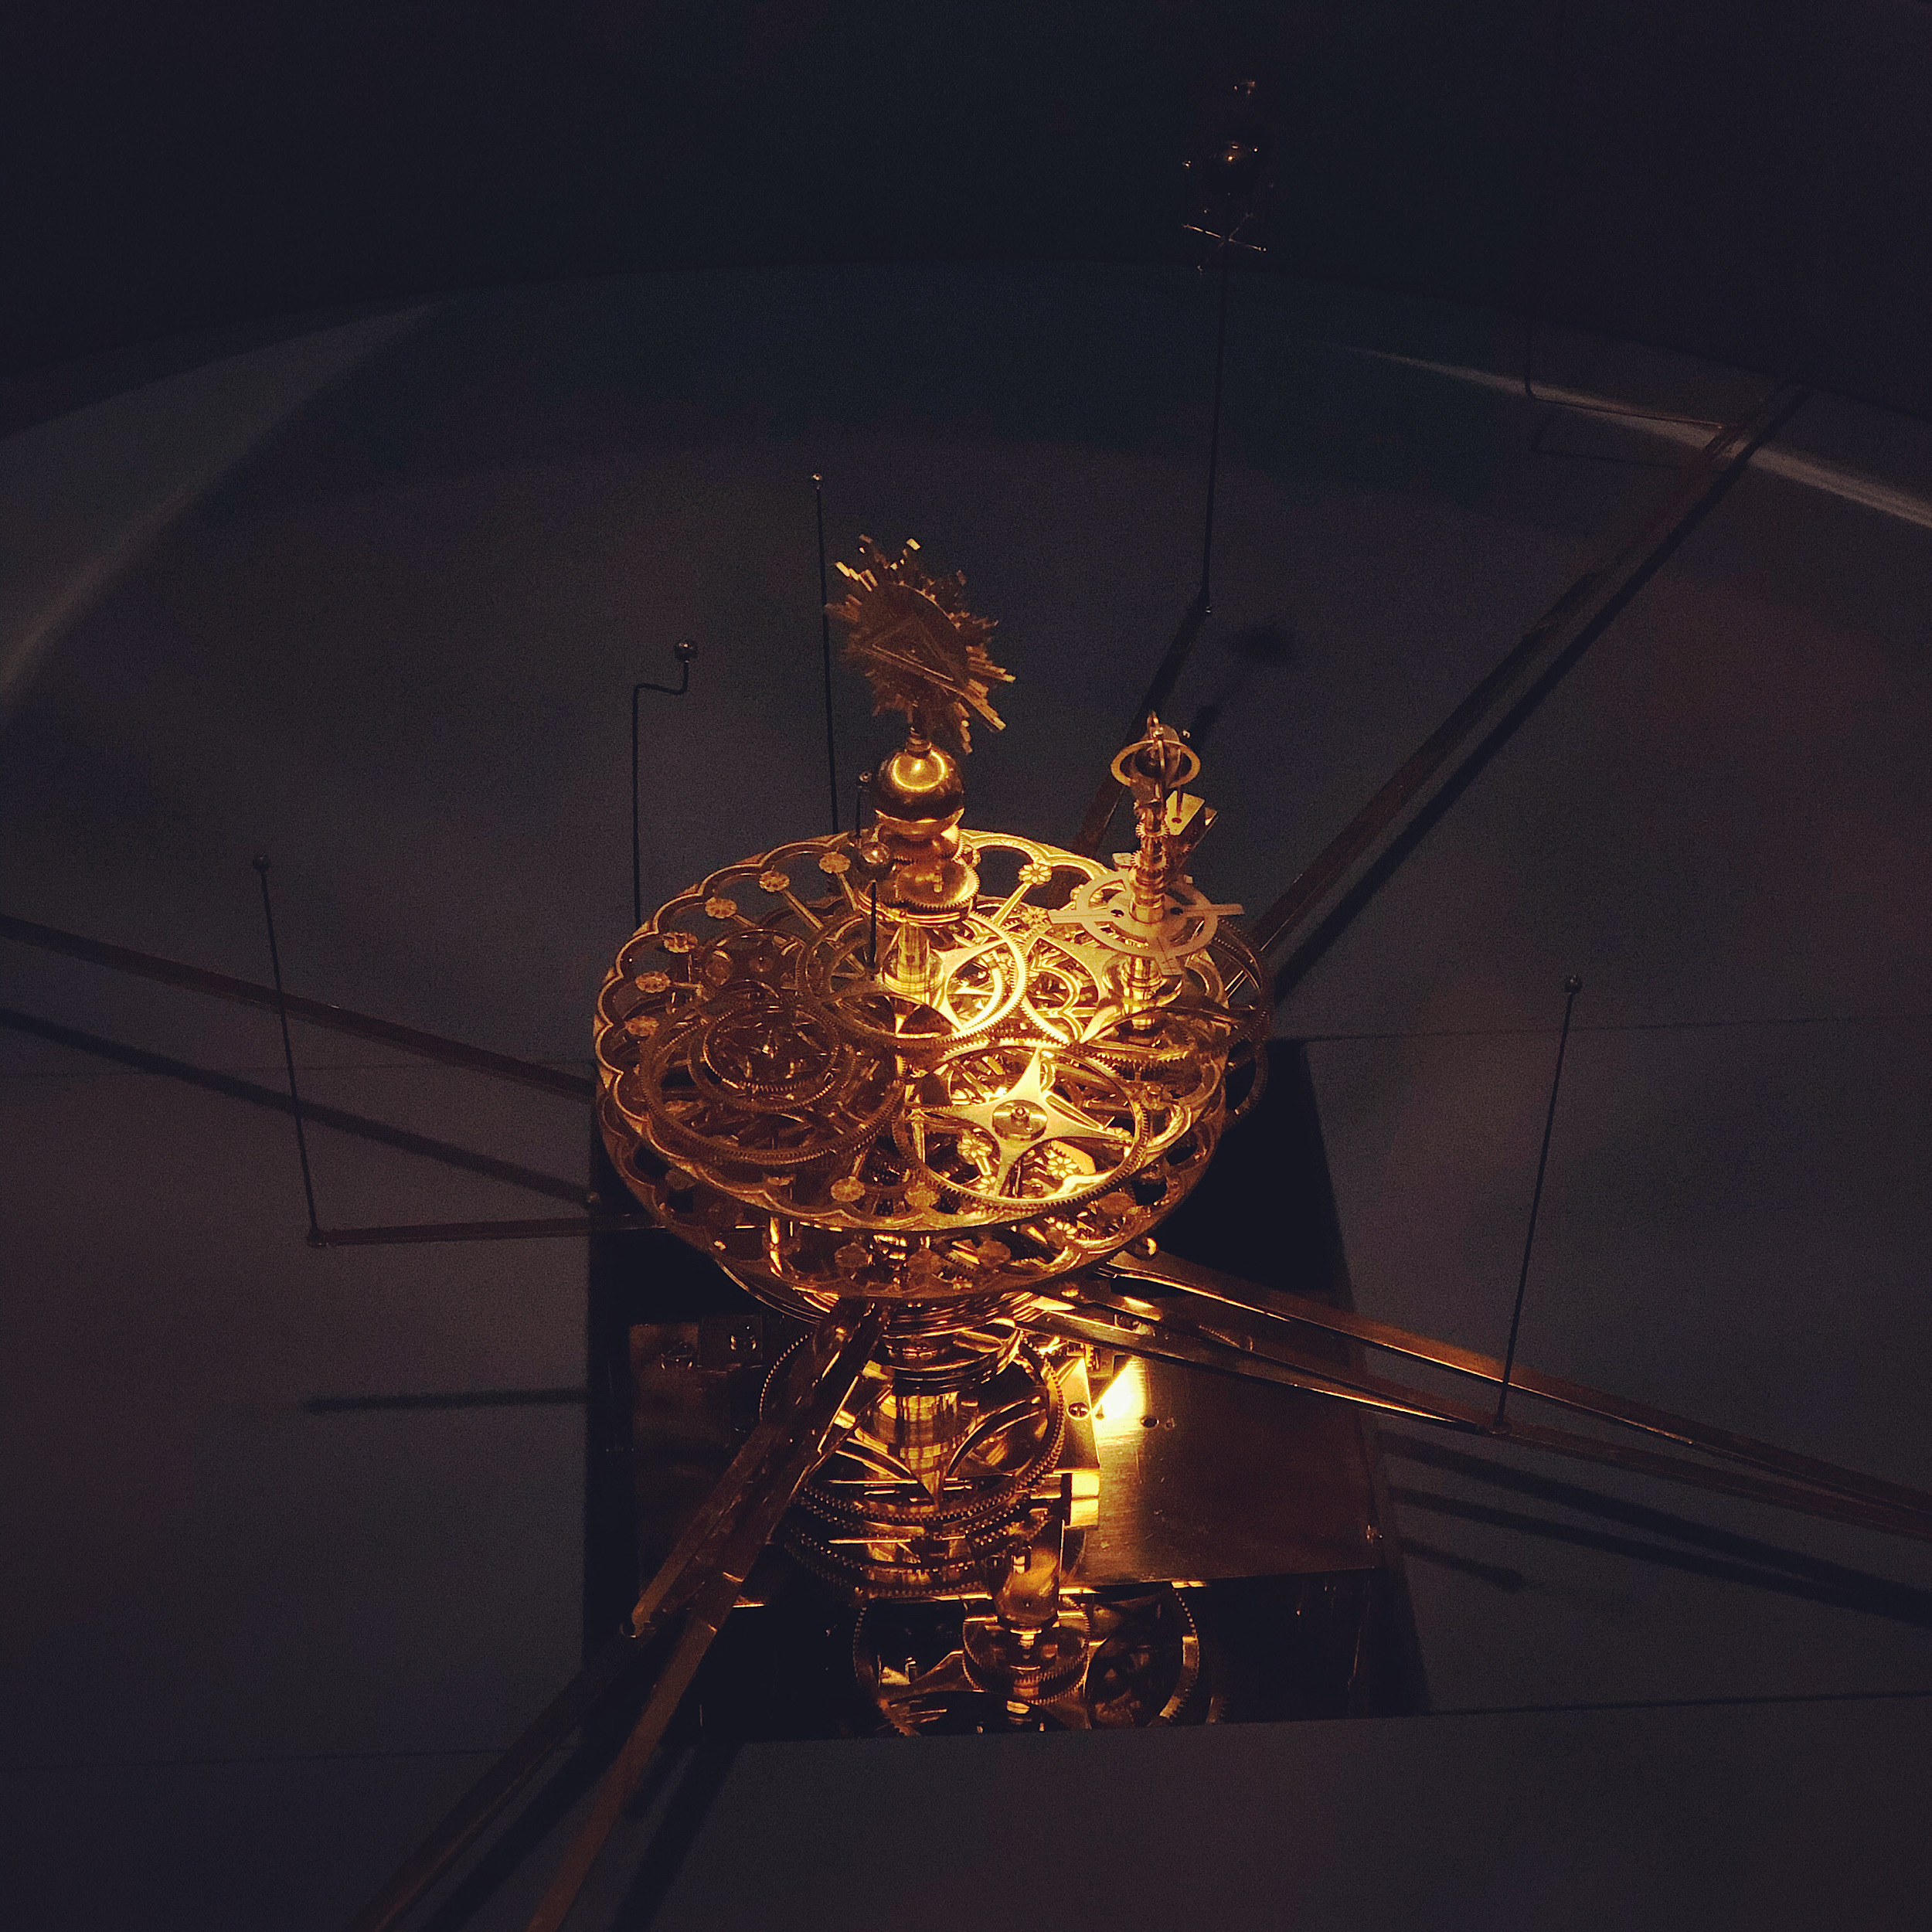 The clockwork of the solar system